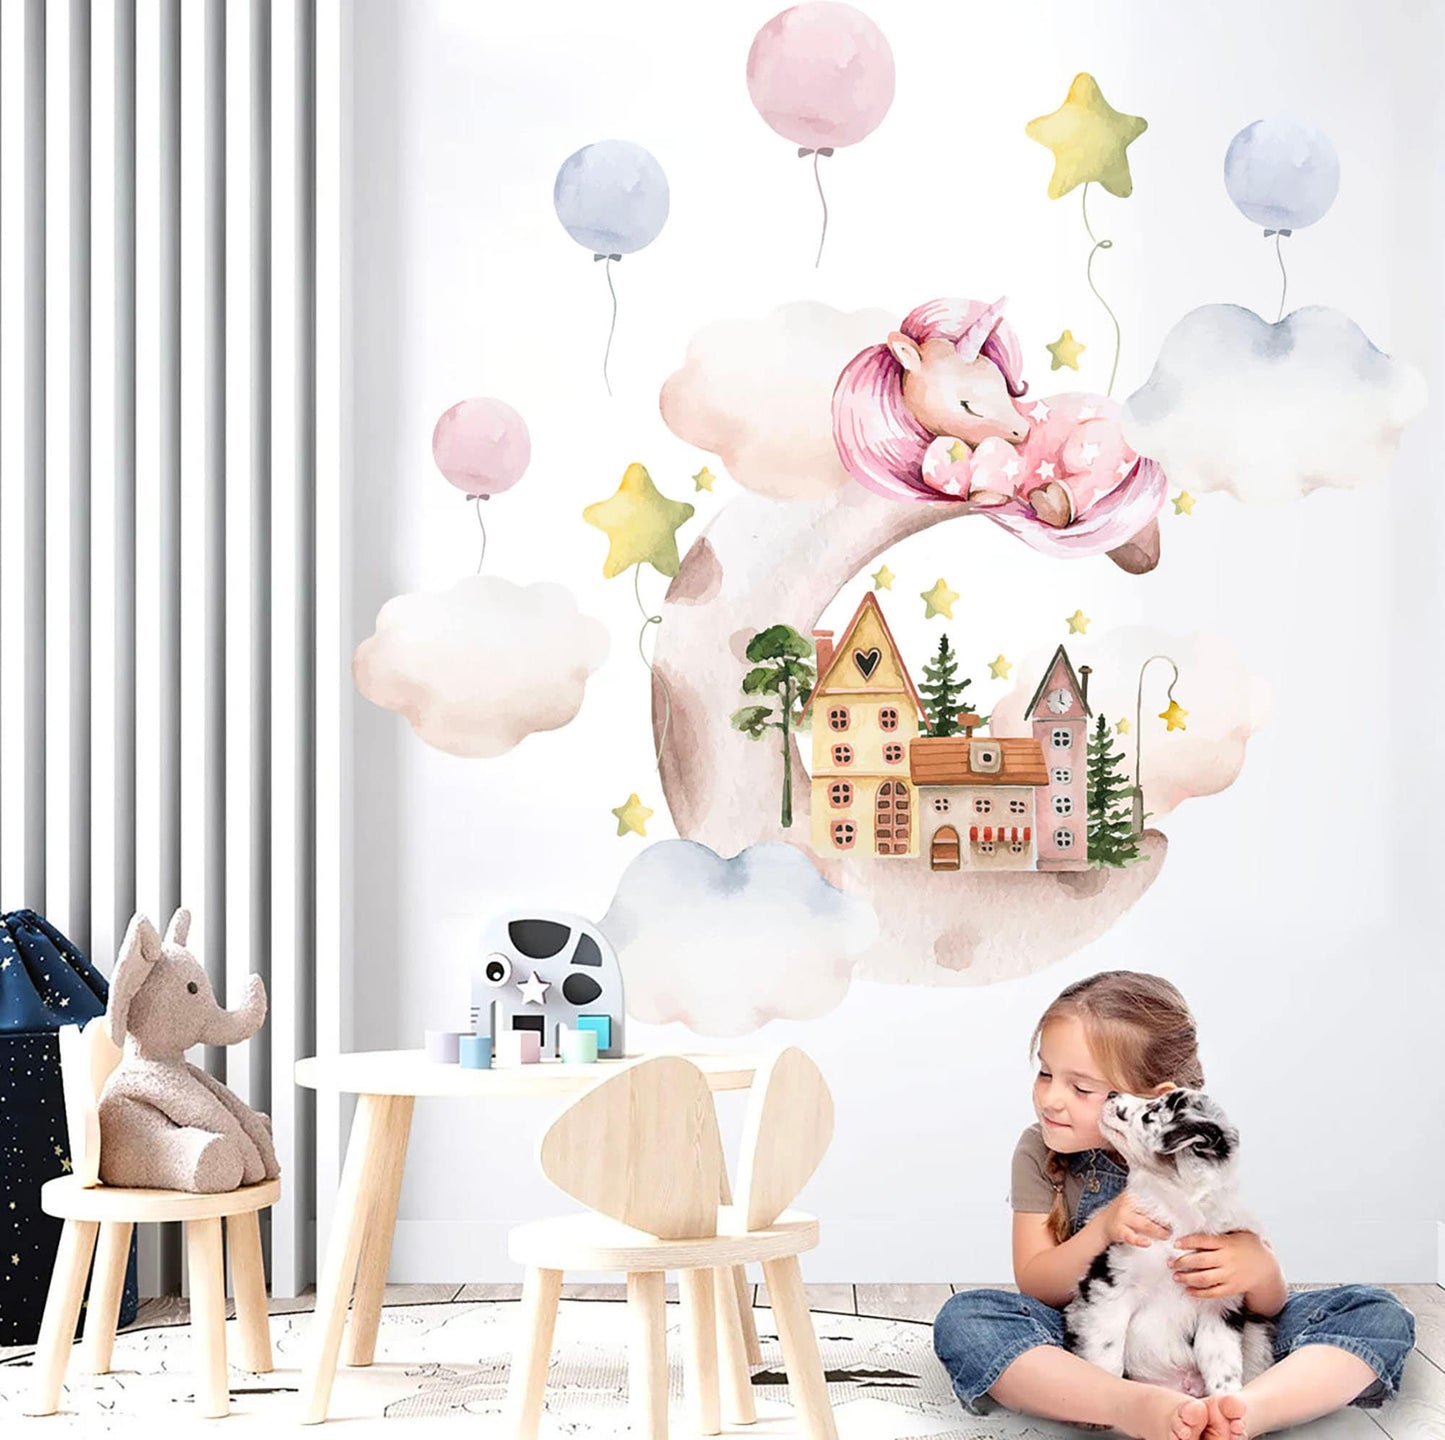 Sleeping Unicorn on Cloud Wall Decal - Castle Balloons Stars - Removable Peel and Stick - BR252